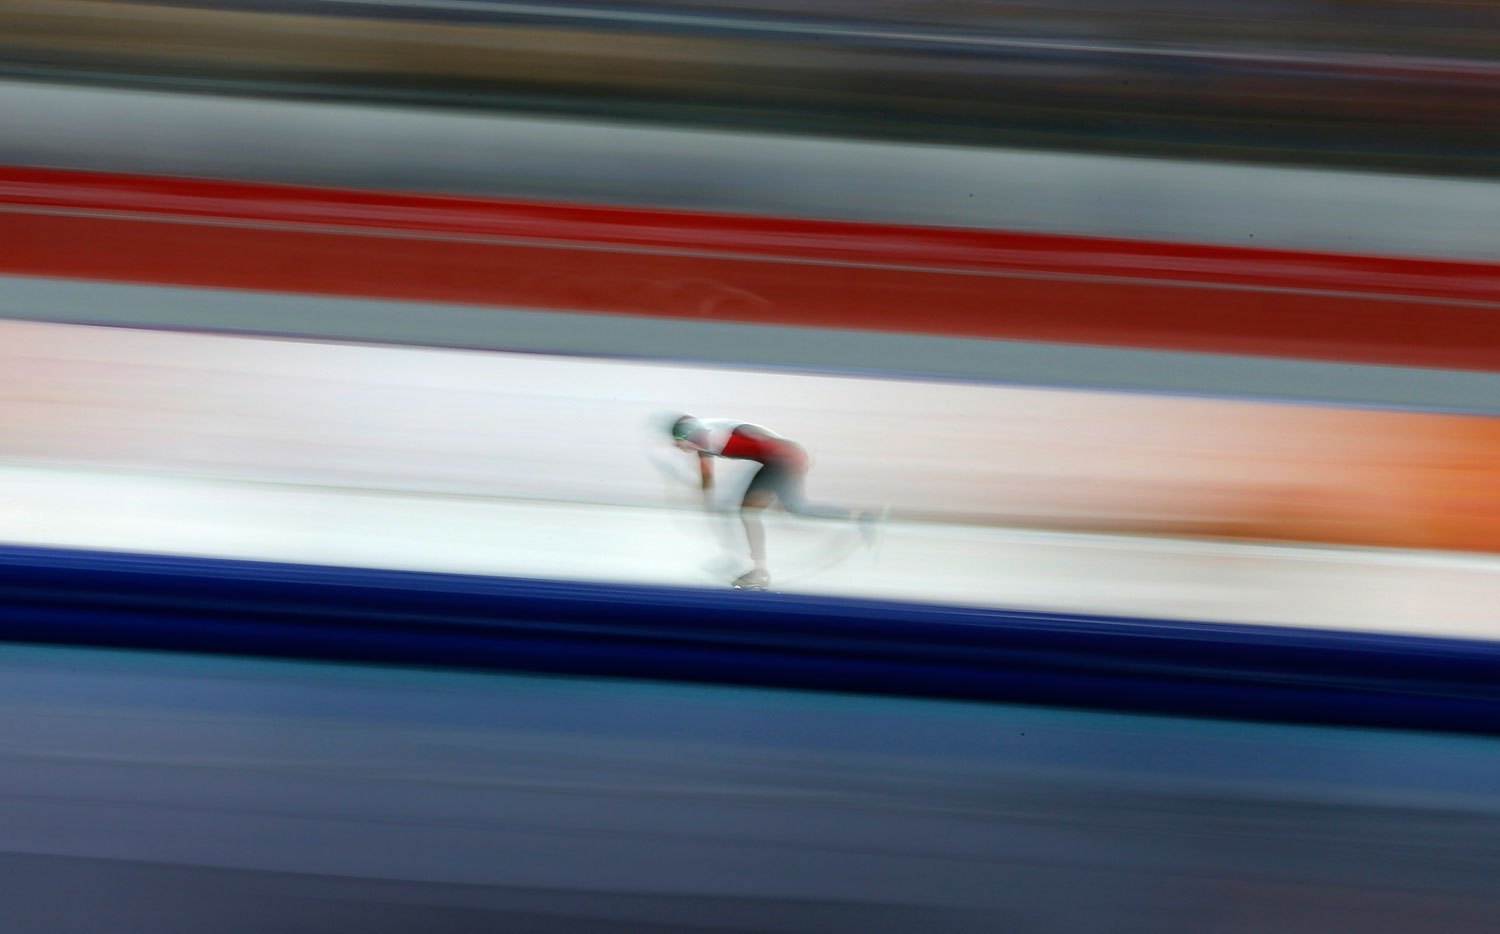 Brittany Schussler of Canada competes in the women's 3000 meters speed skating race, Feb. 9, 2014.